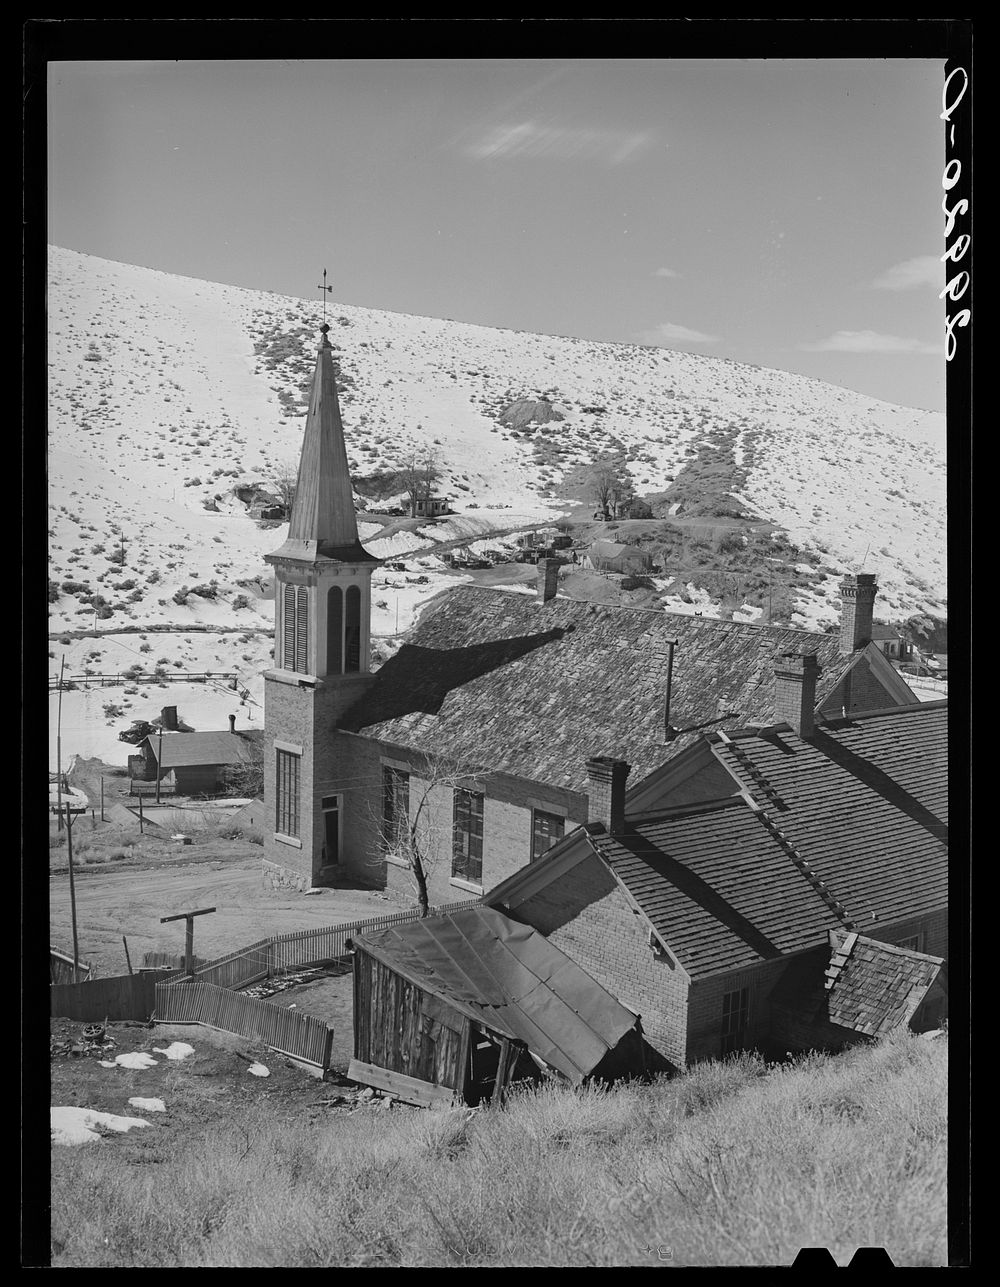 Church in abandoned mining town. Austin, Nevada. Sourced from the Library of Congress.